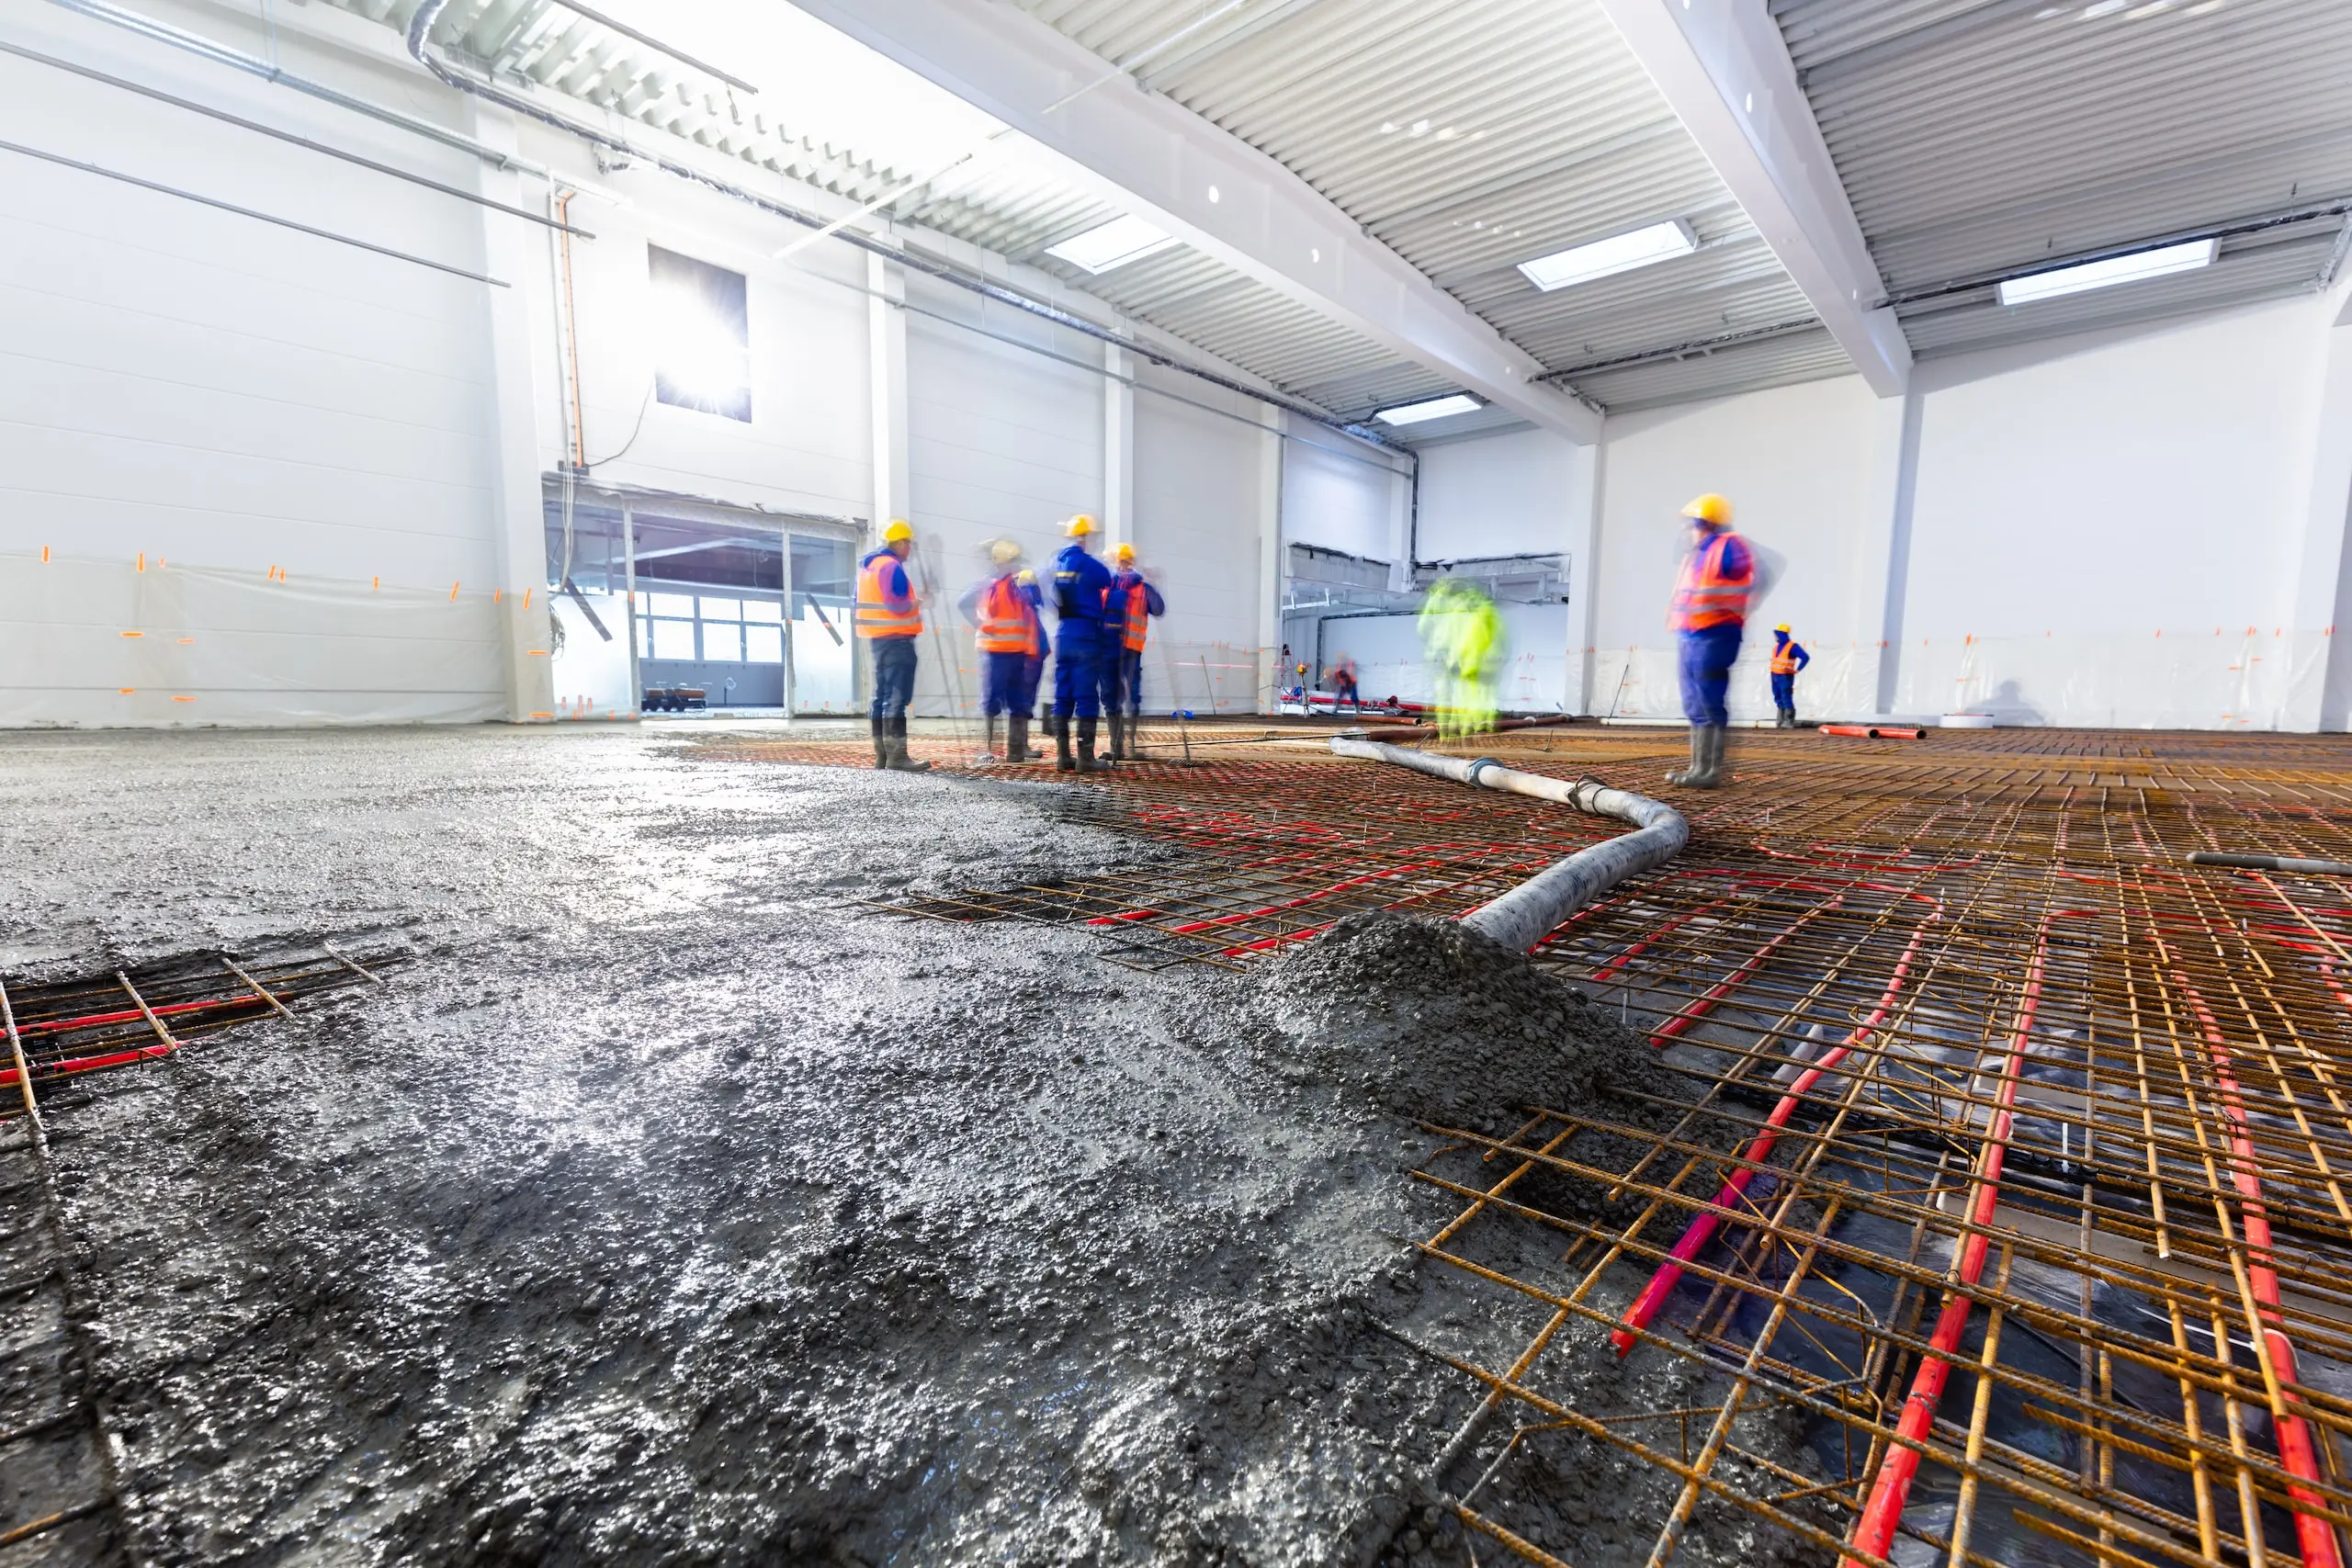 workers-do-concrete-screed-on-floor-with-heating-i-2022-12-16-11-04-33-utc-min